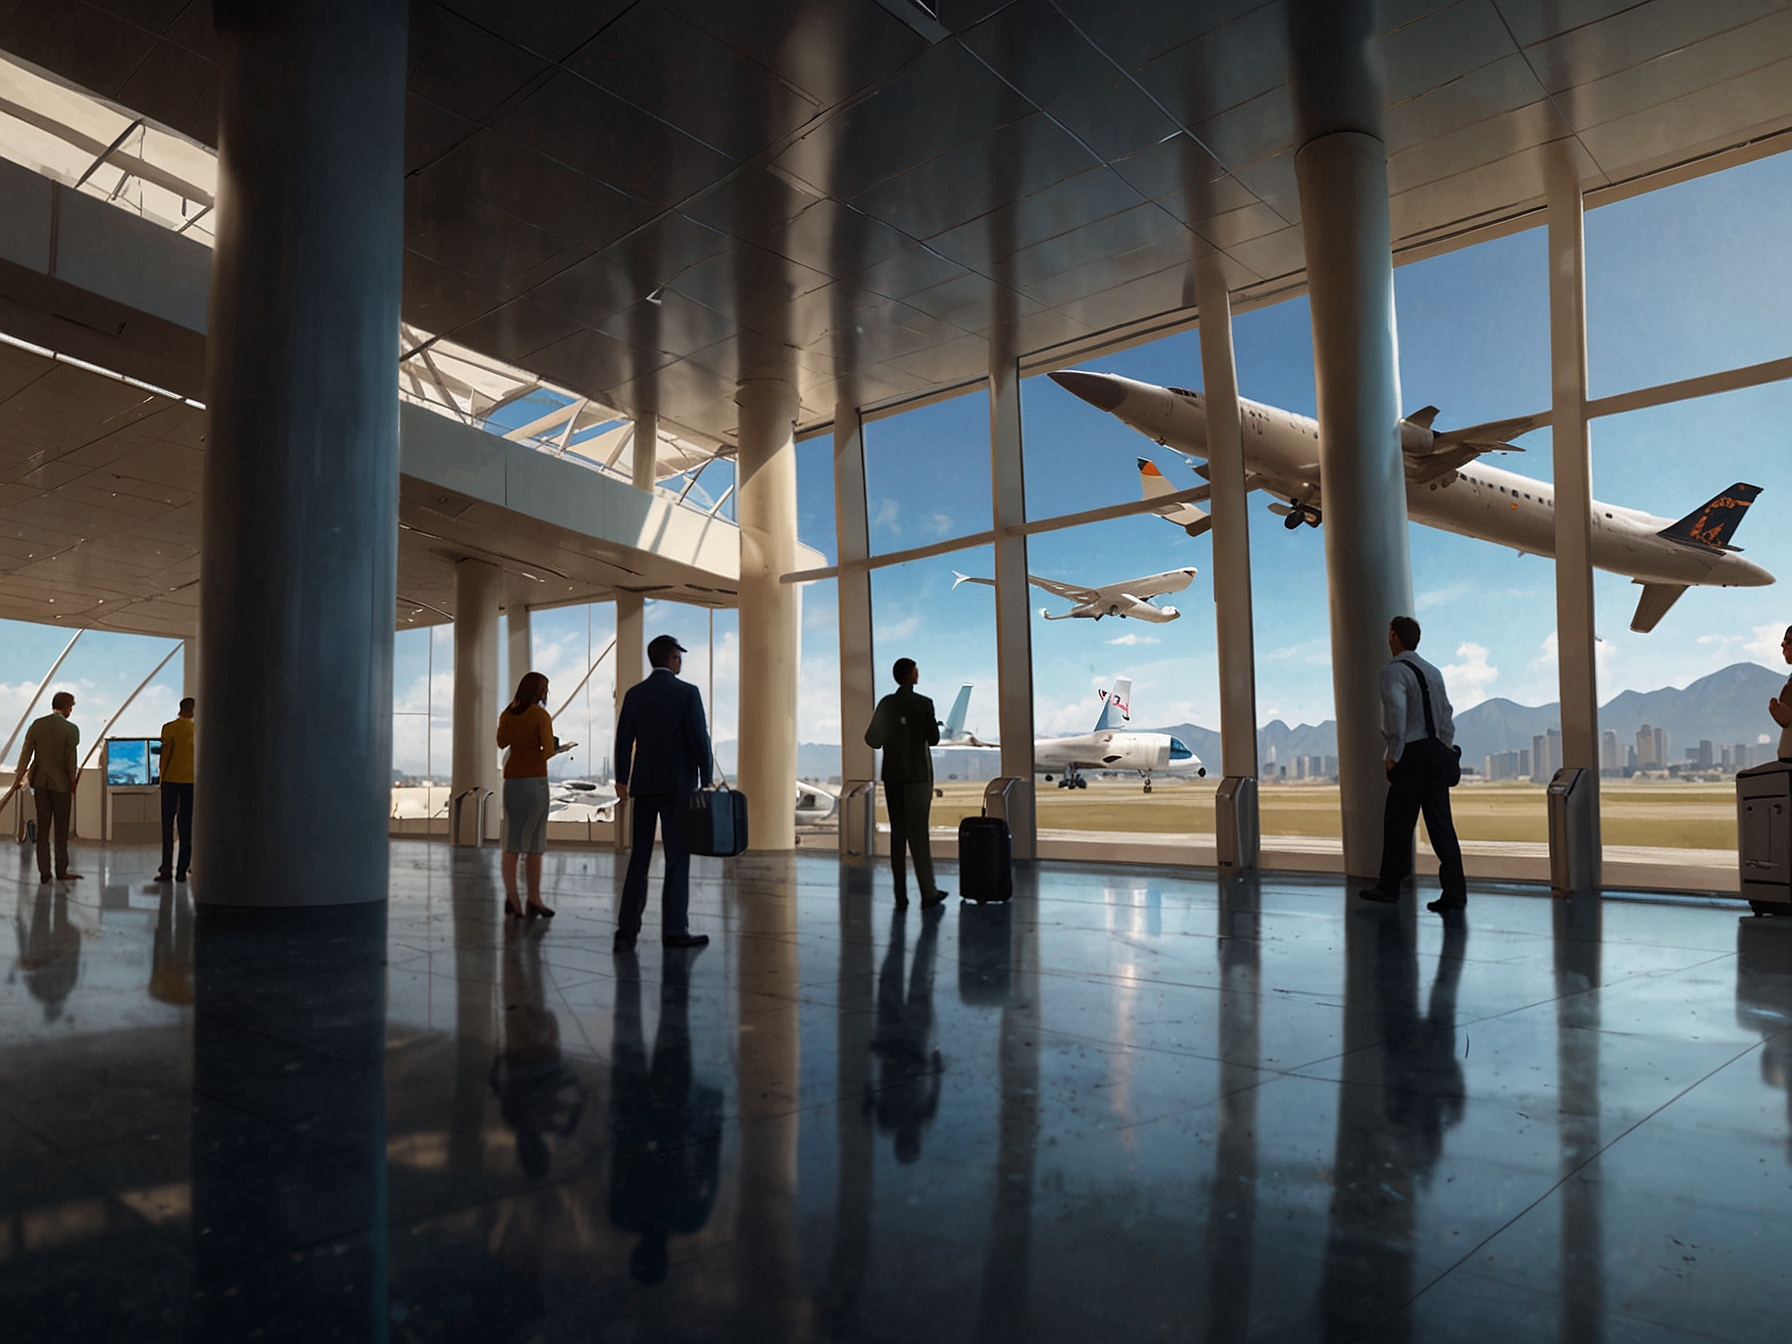 An image depicting the on-foot gameplay feature in Microsoft Flight Simulator 2024, where a player is exploring an airport terminal and conducting a pre-flight inspection of the aircraft.